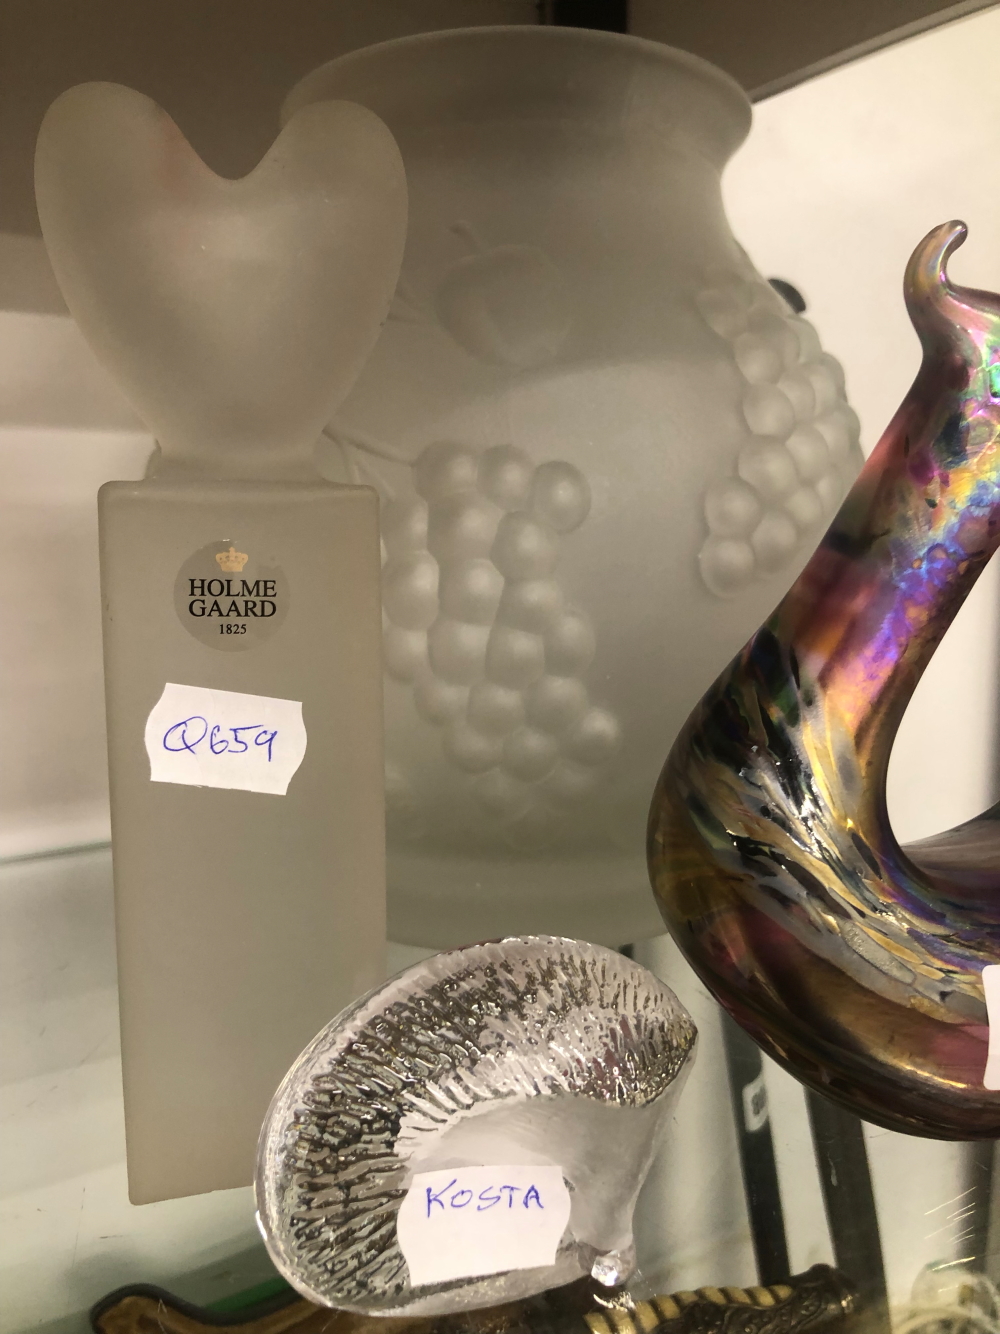 A KOSTA GLASS HEDGEHOG, A HEATON ART GLASS SCULPTURE, A HOLME GAARD FROSTED ORNAMENT AND A LARGE - Image 3 of 3